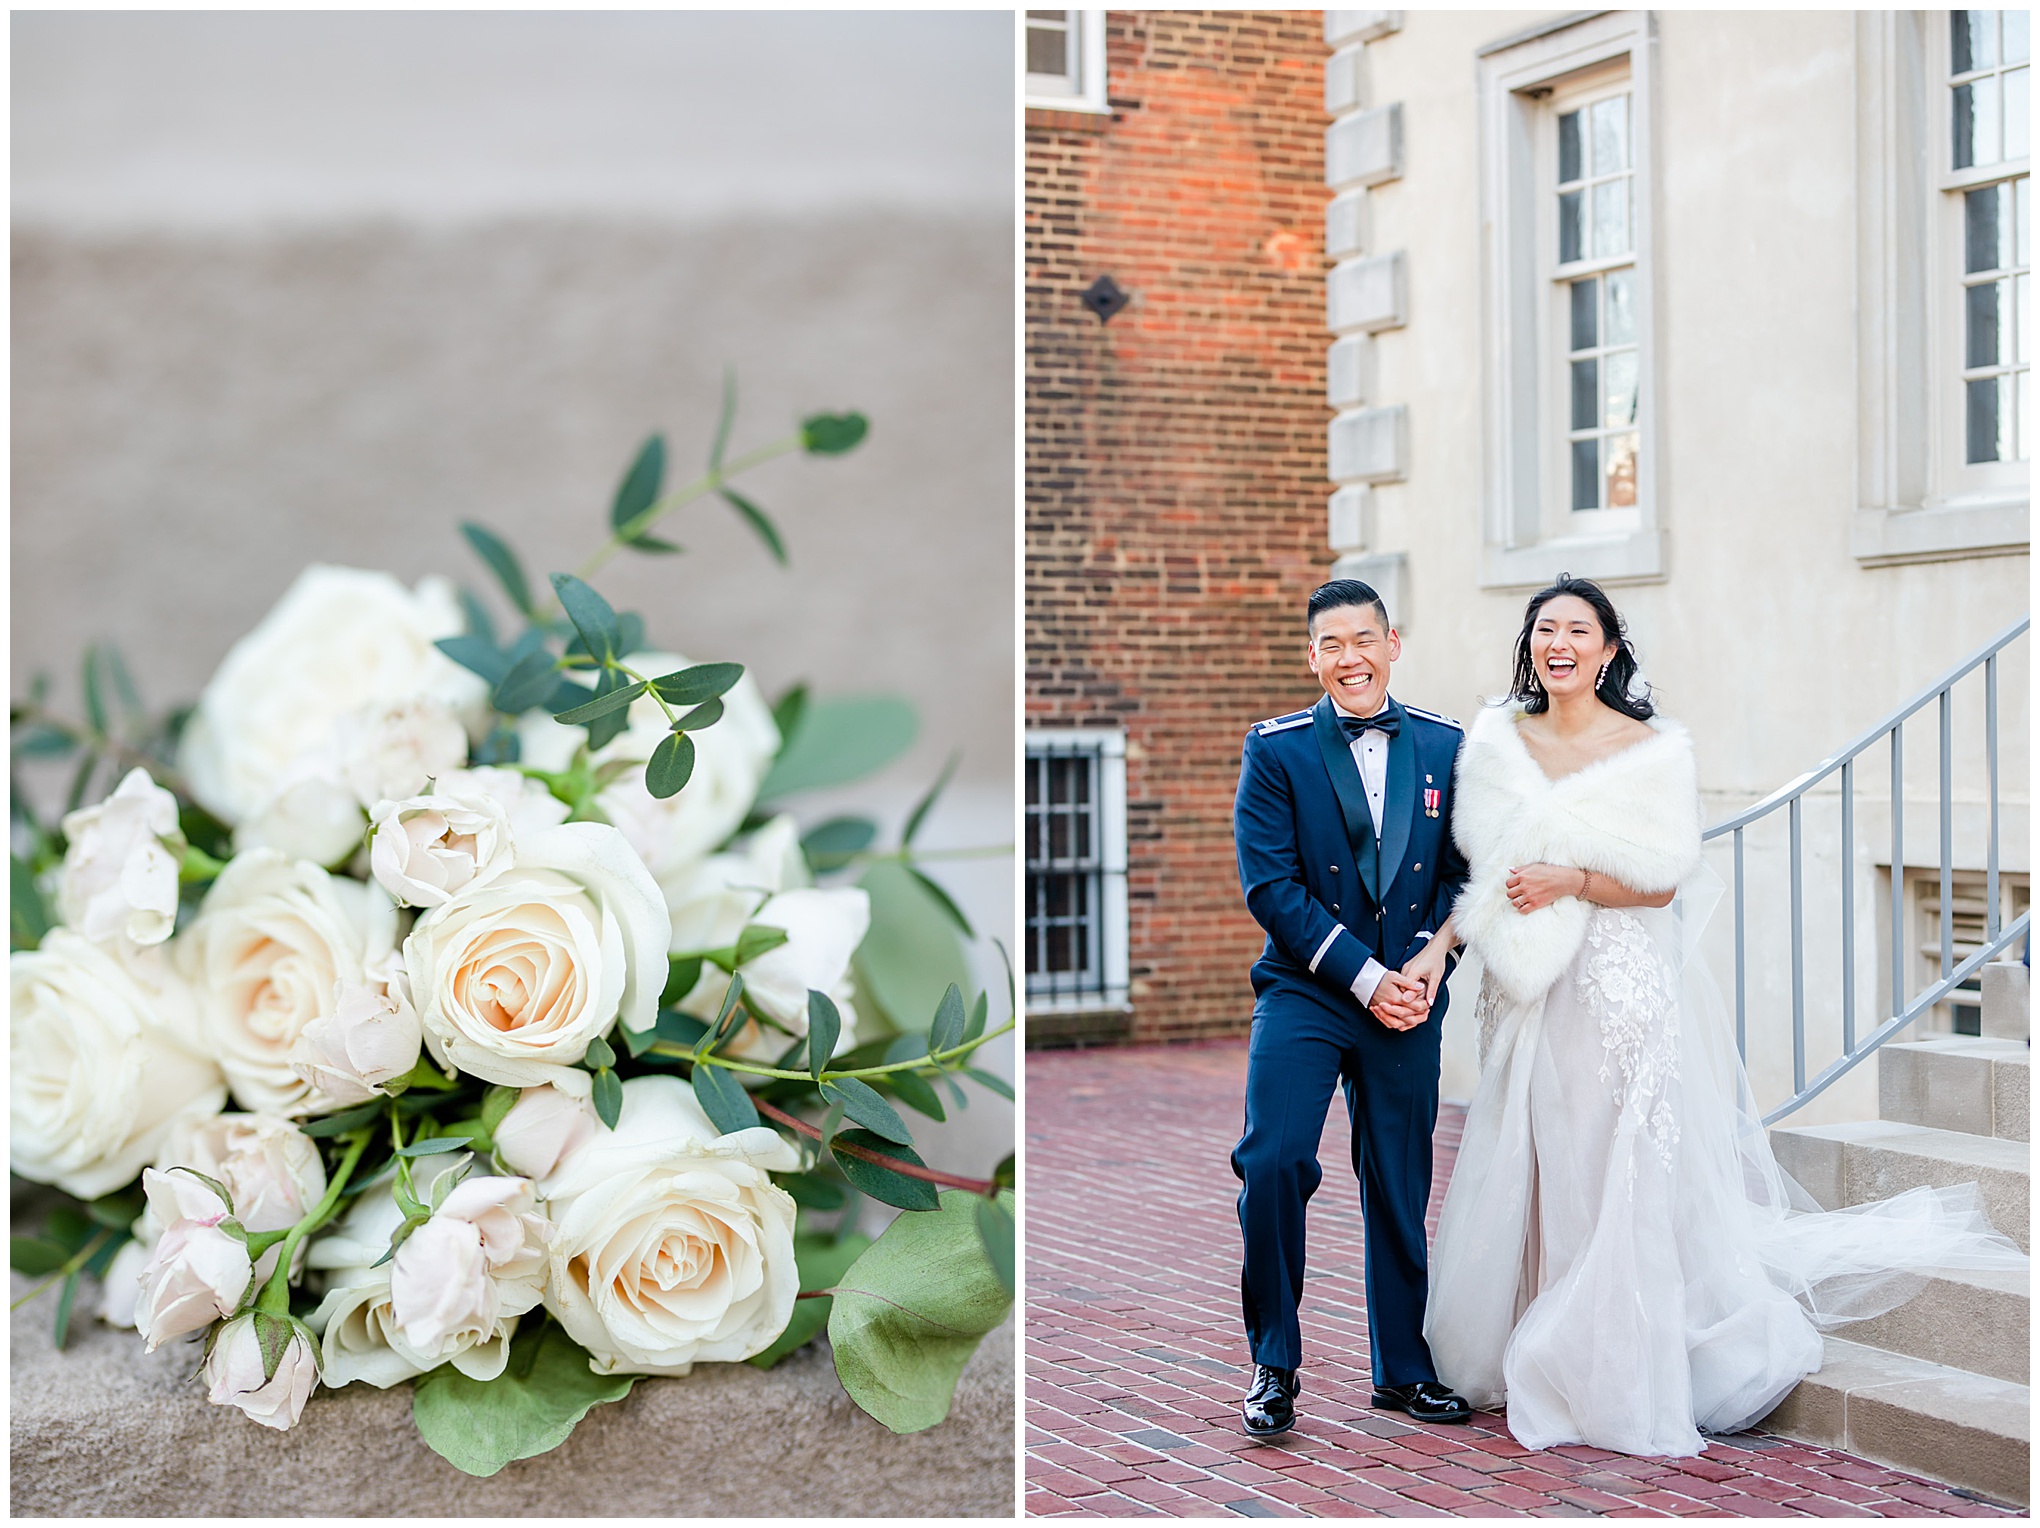 Old Town Alexandria elopement, Alexandria wedding photographer, Alexandria wedding, Old Town elopement, Alexandria courthouse wedding, Rachel E.H. Photography, winter elopement, winter wedding, military wedding, natural light wedding photography, classic wedding photos, simple wedding, outdoor wedding ceremony, white and green bridal bouquet